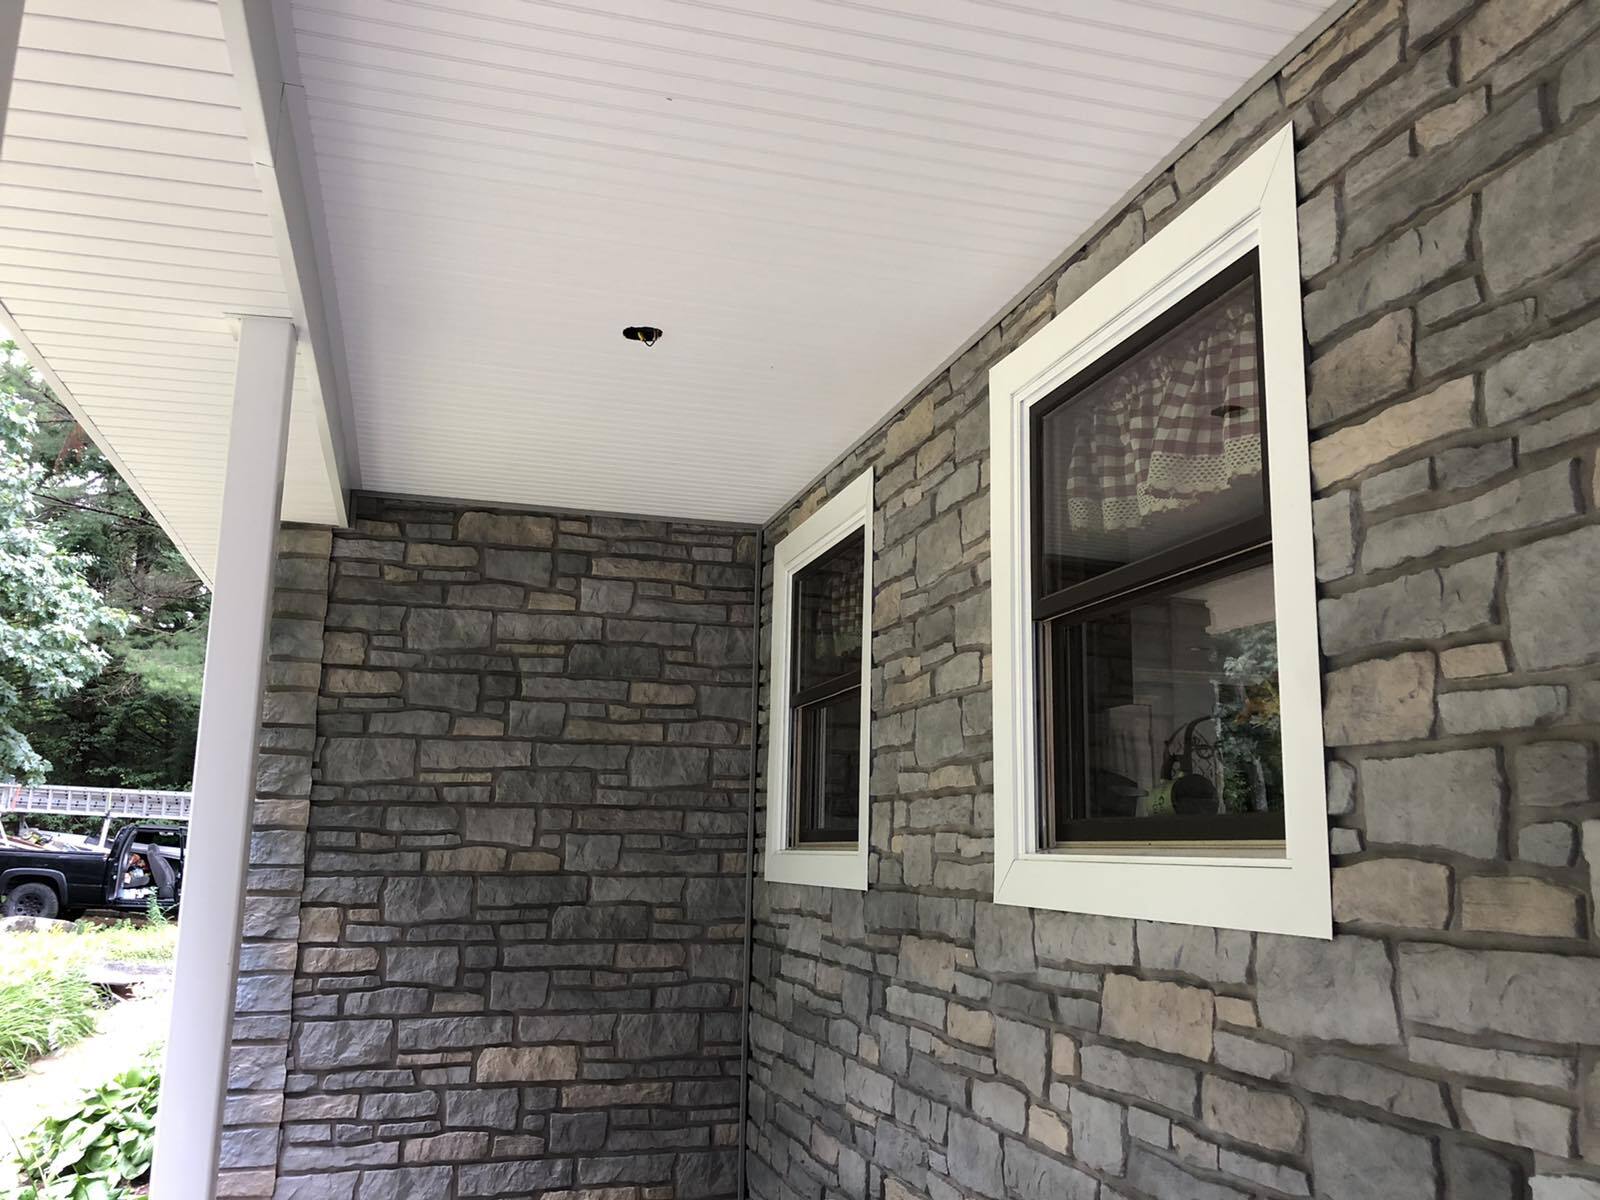 Gorgeous imitation stone made from vinyl installed for porch and complimented by white trim for windows.